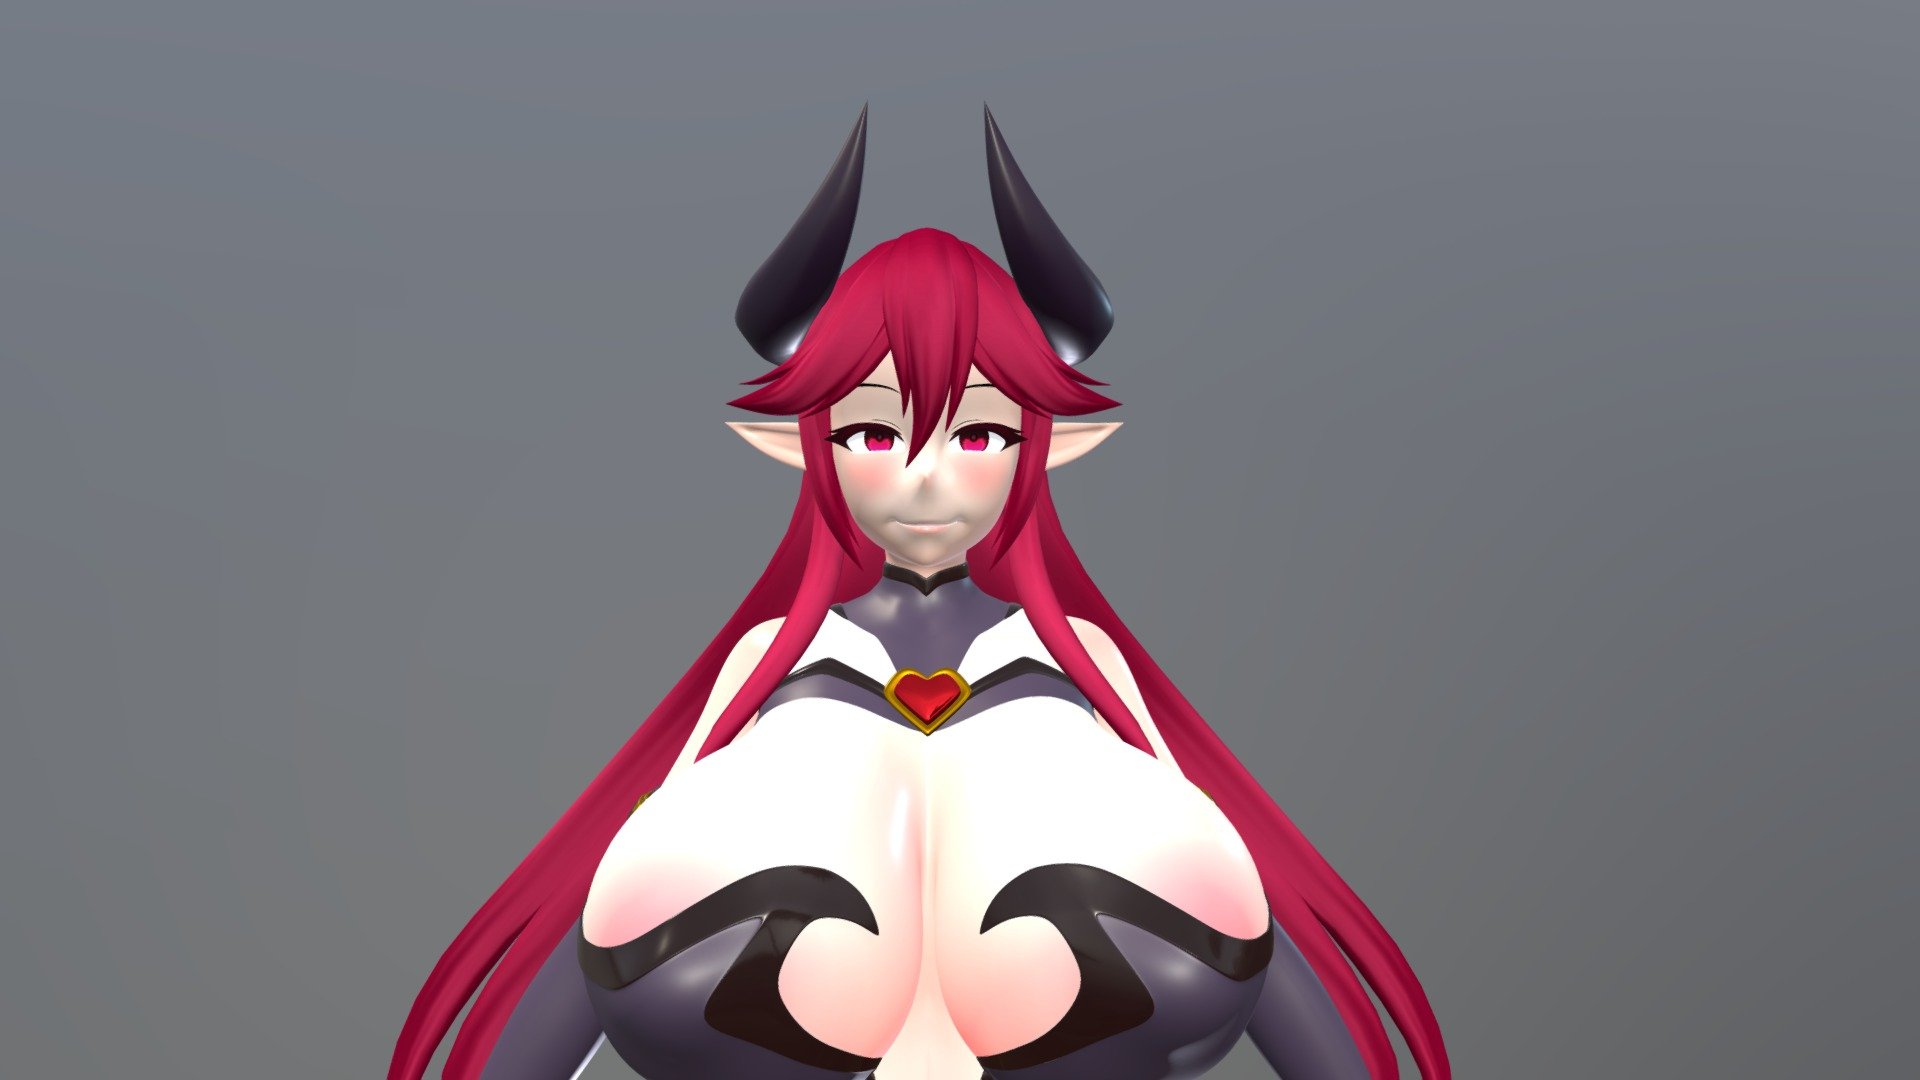 Anime Demon Succubus

All my networks here: https://yamisukebe.carrd.co/

Model available in my Gumroad ( Yamisukebe) - Anime Demon Succubus - 3D model by Yamisukebe 3d model